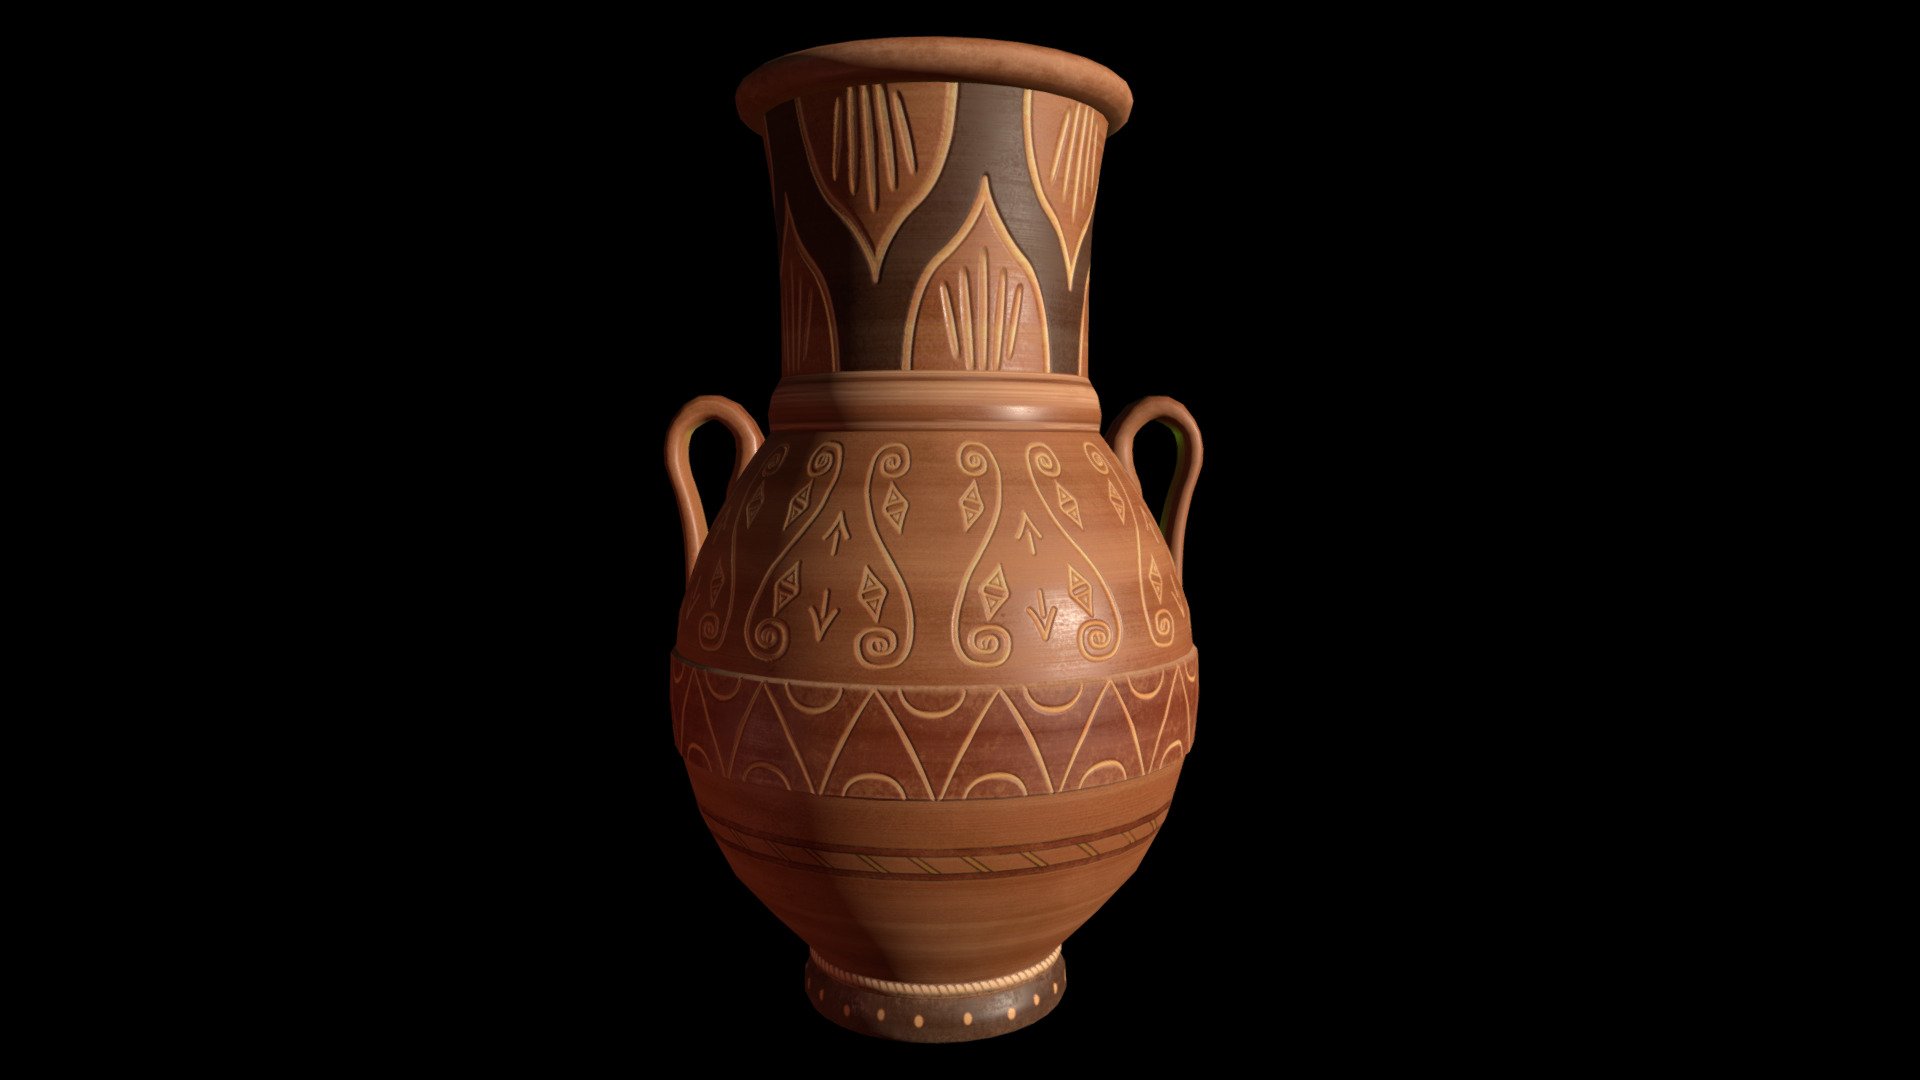 A middle eastern pottery for your production about One Thousand and One Nights project&hellip; 

If you wish :) - Middle Eastern Terracota Urn #2 - 3D model by The Ancient Forge (Svein) (@svein) 3d model